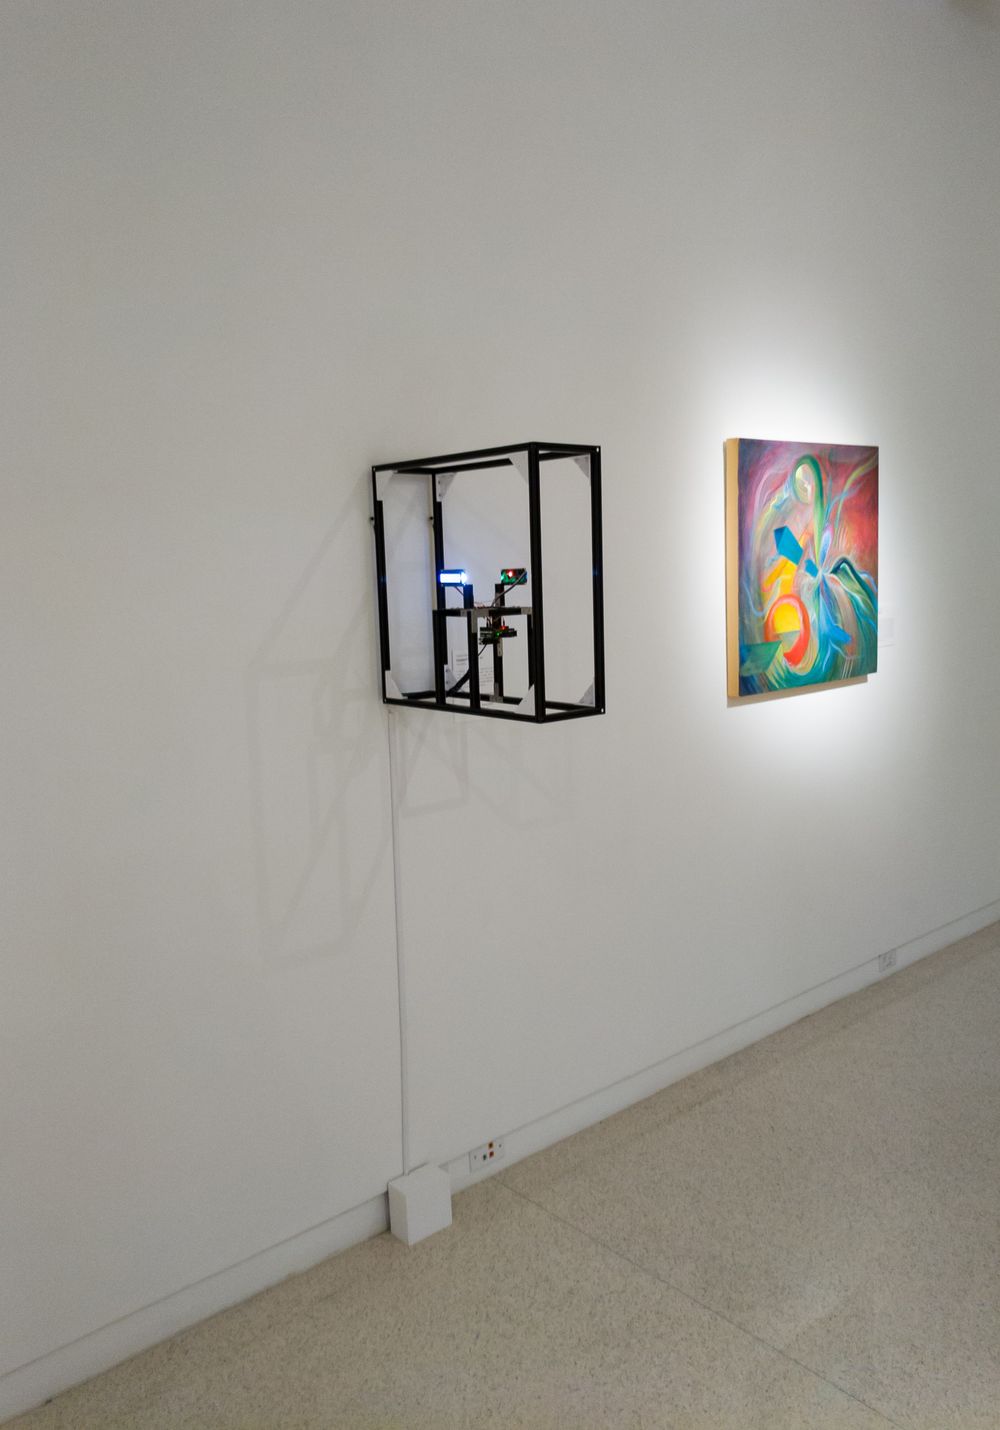 As installed in gallery.